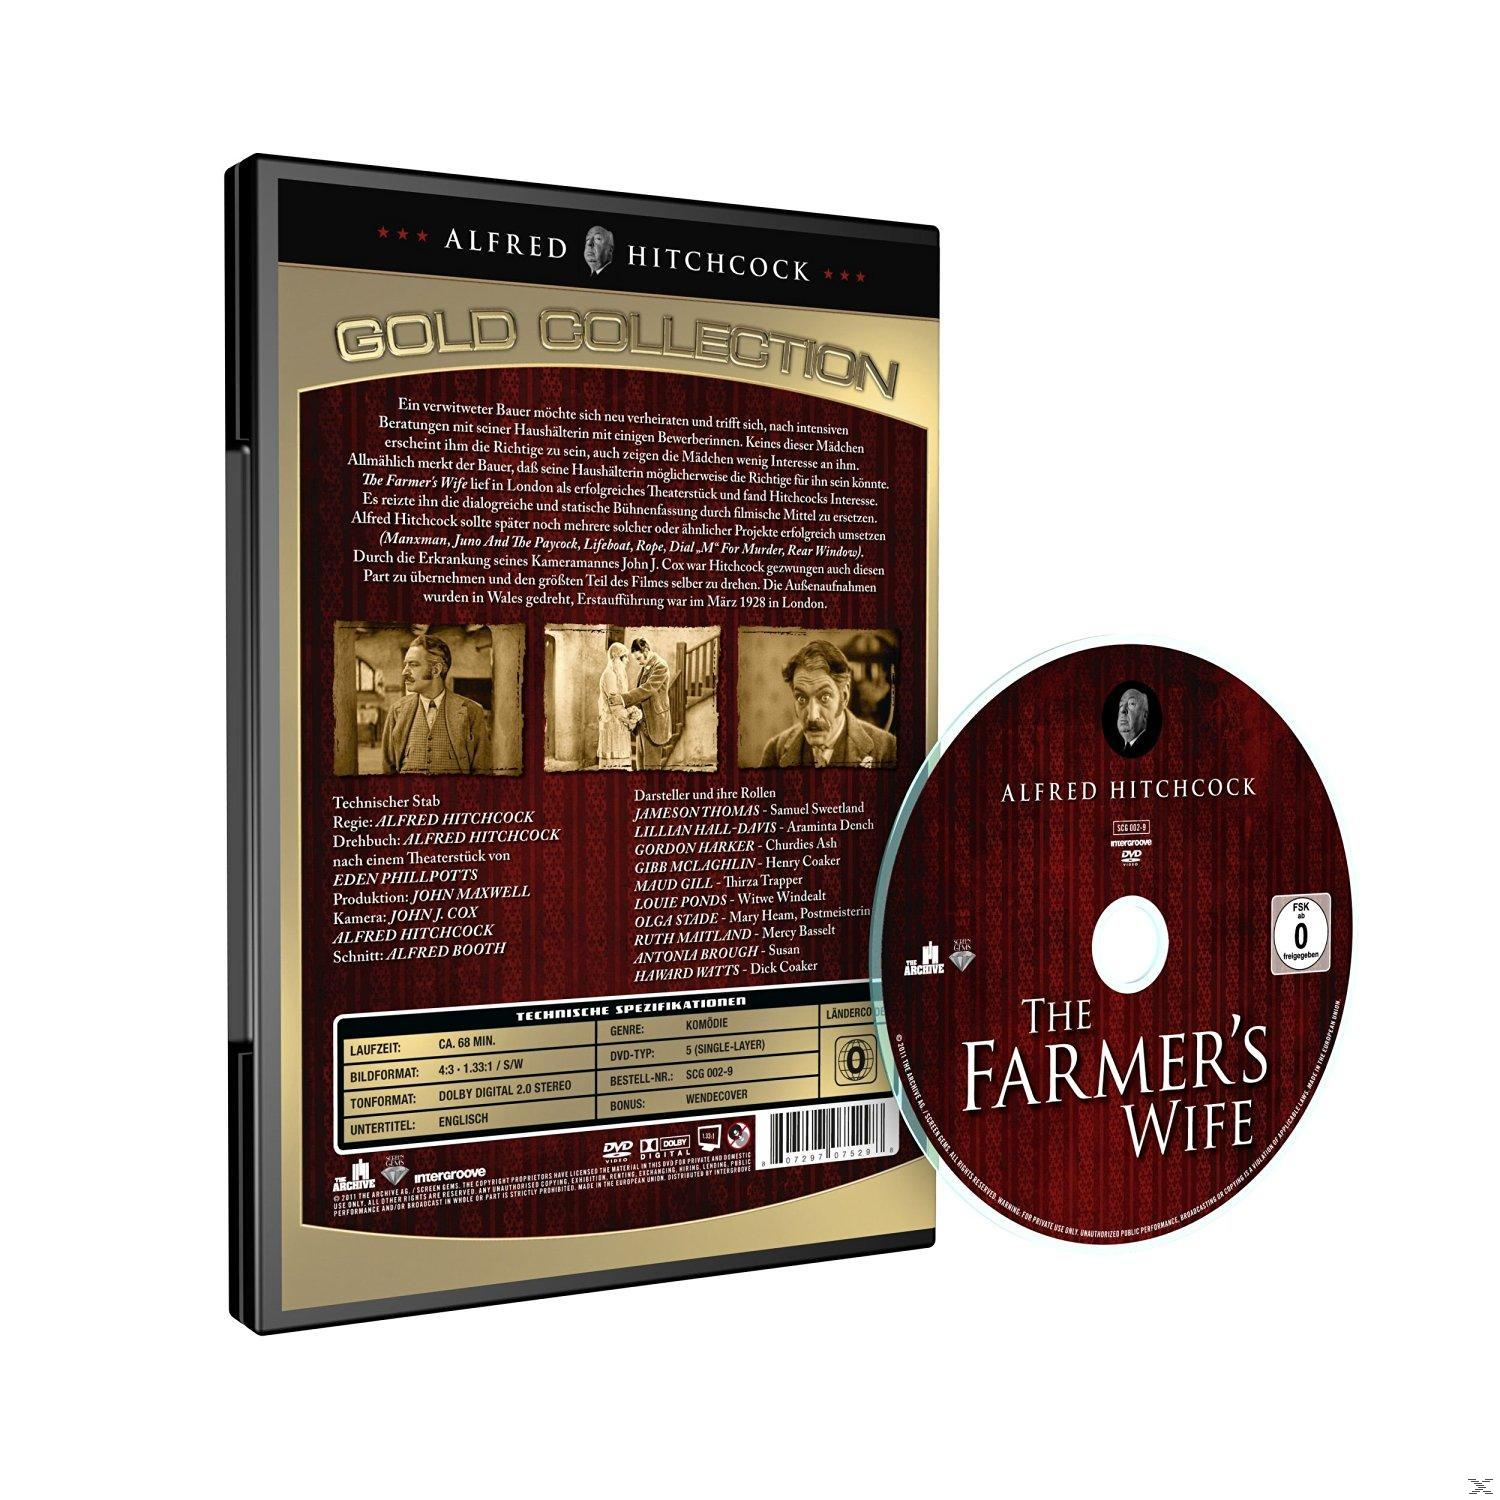 The DVD - Farmer´s Wife Hitchcock Alfred